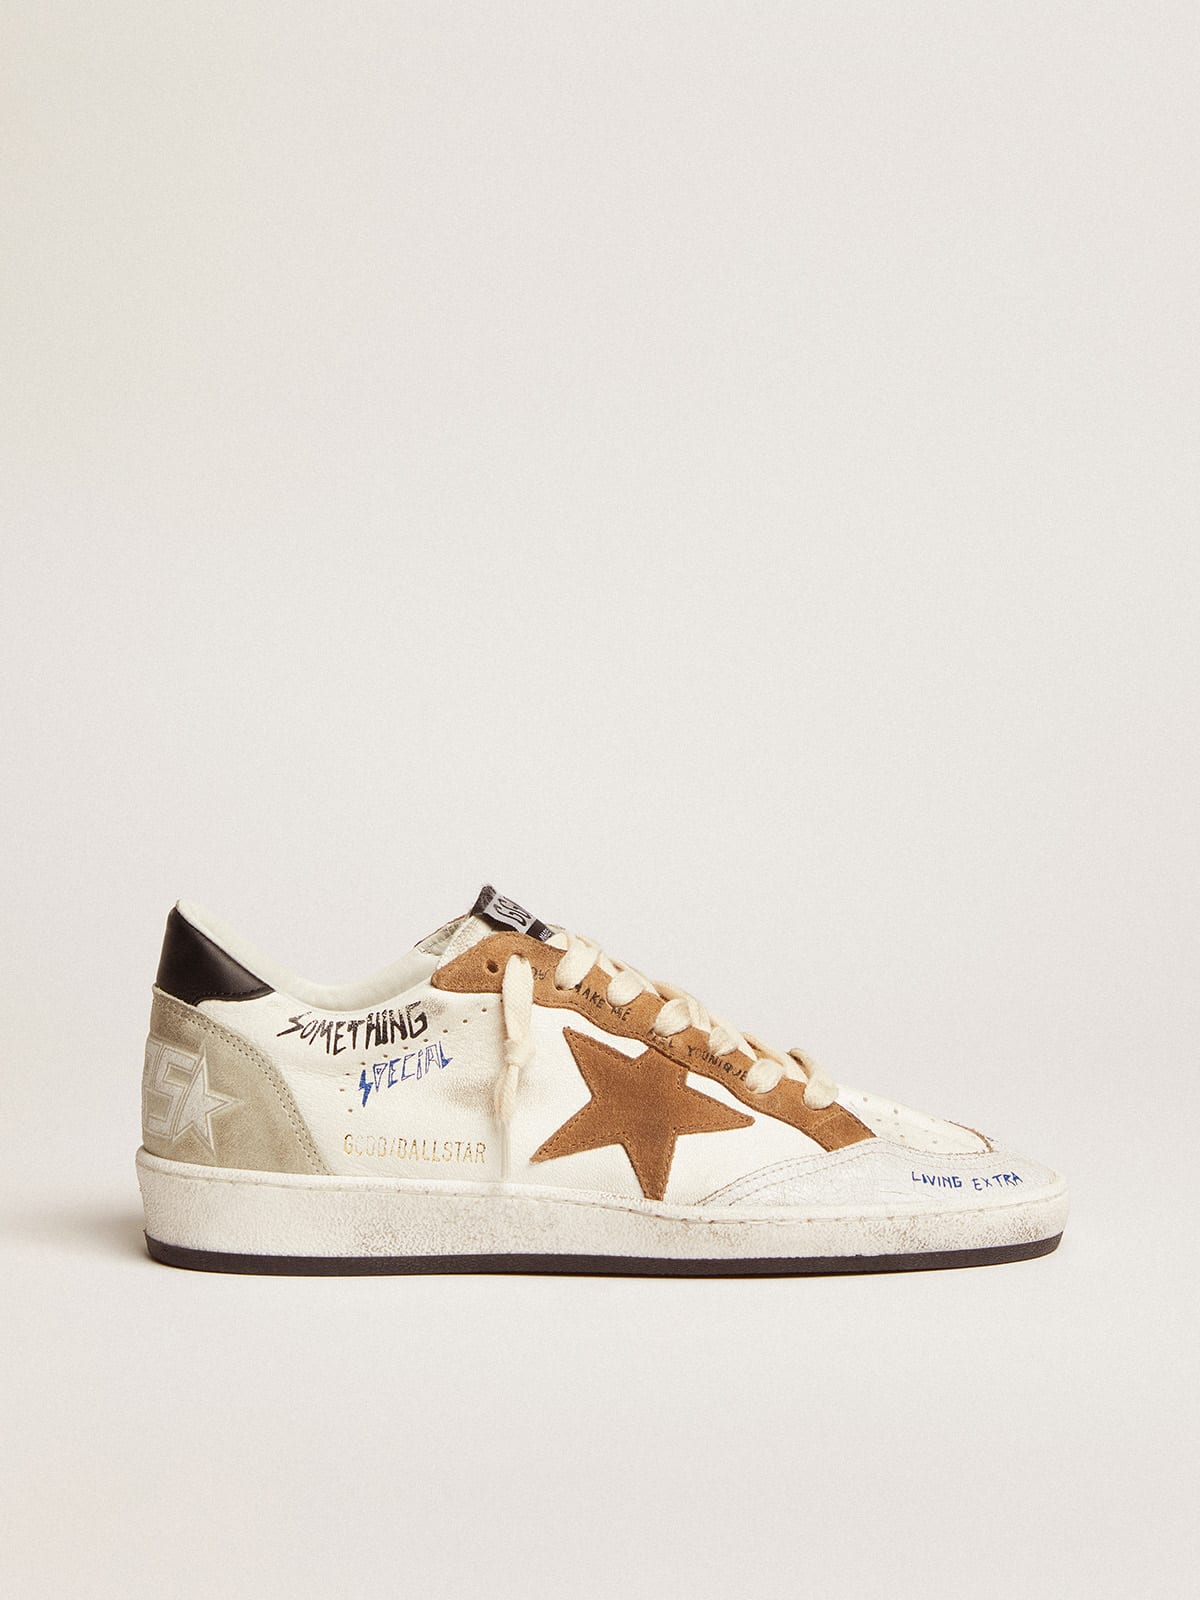 Ball Star sneakers with tobacco-colored suede star and black leather heel tab